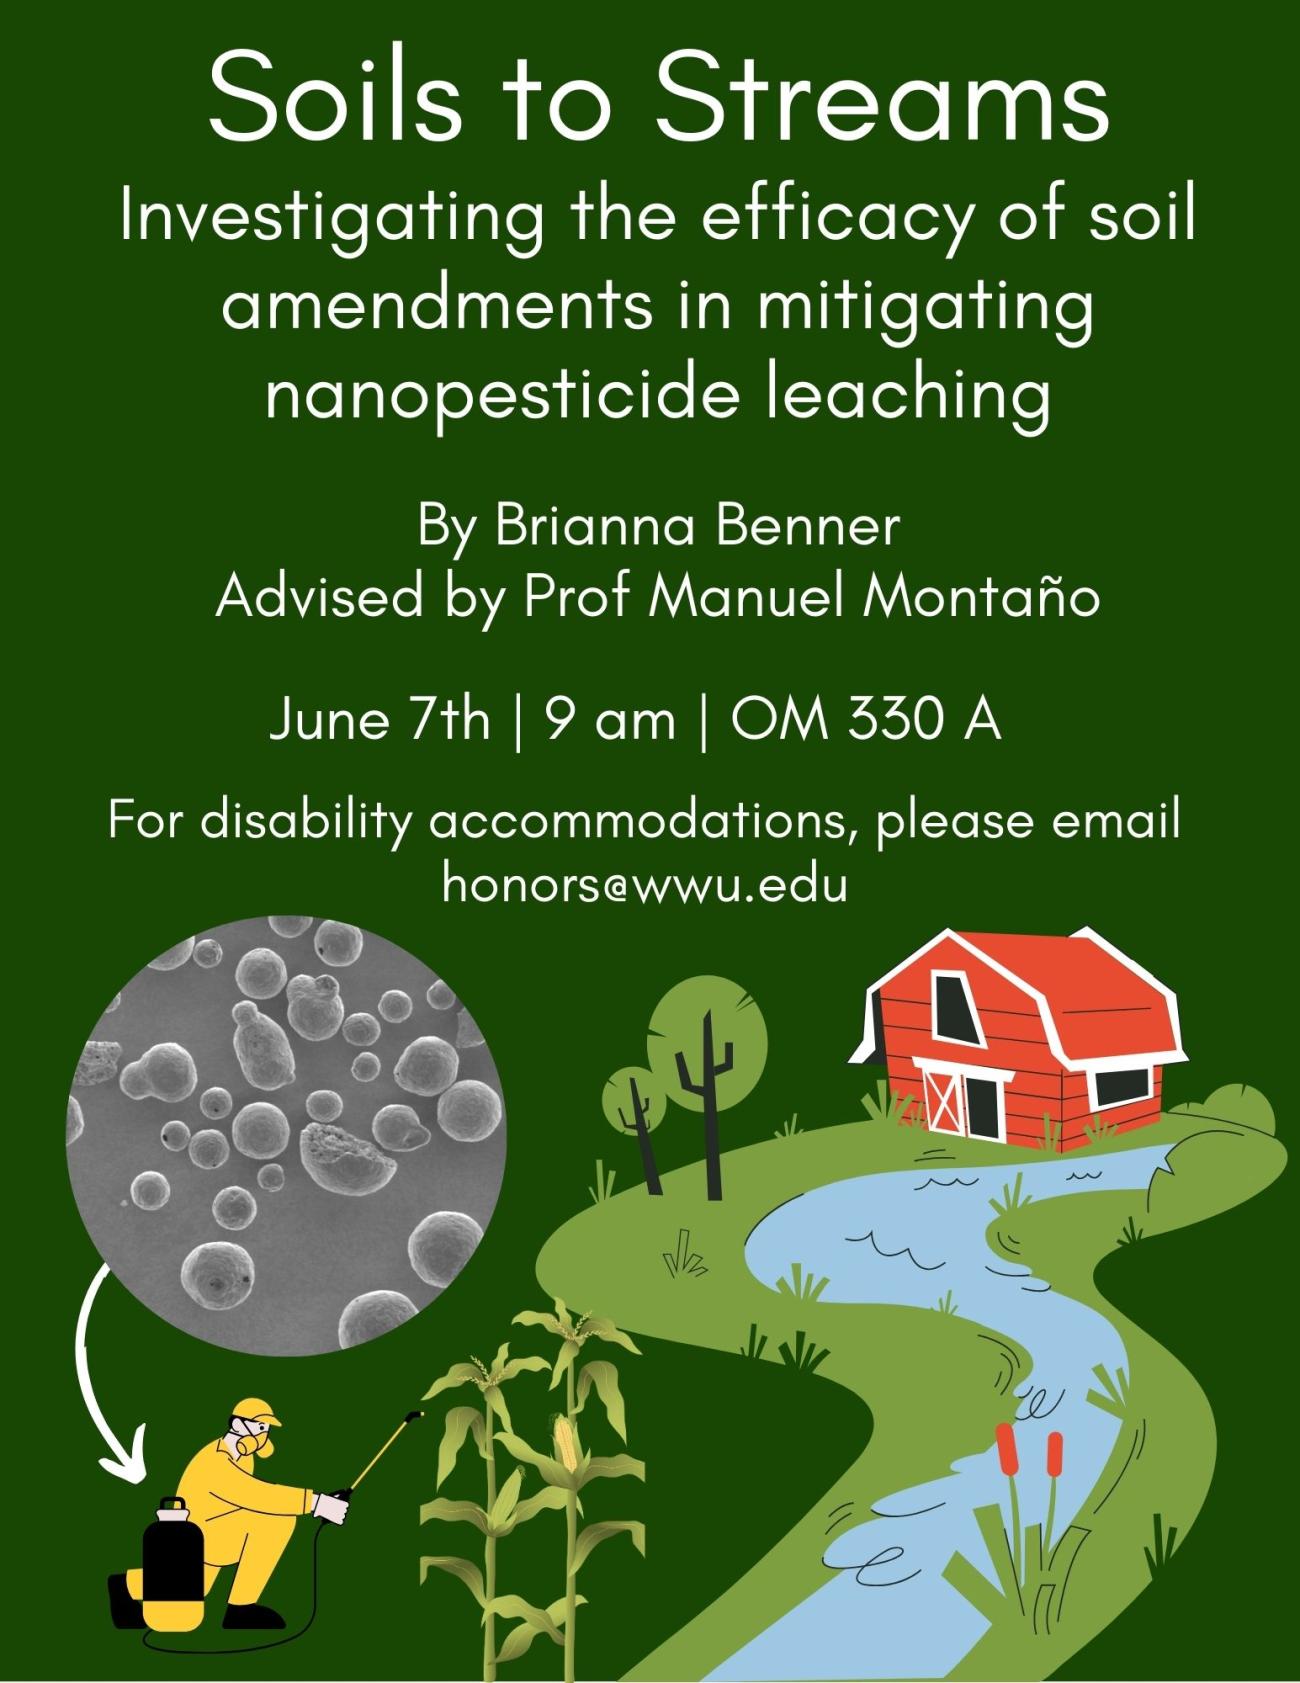 Green background with containing an illustrated farm and stream, next to which someone is applying pesticides on a plant. Above the pesticide tank is an SEM image of a copper-based nanopesticide. Text reads "Soils to Streams: Investigating the efficacy of soil amendments in mitigating nanopesticide leaching. By Brianna Benner, Advised by Prof Manuel Montaño. June 7th, 9 am, Old Main 330A. For disability accommodations, please email honors@wwu.edu."